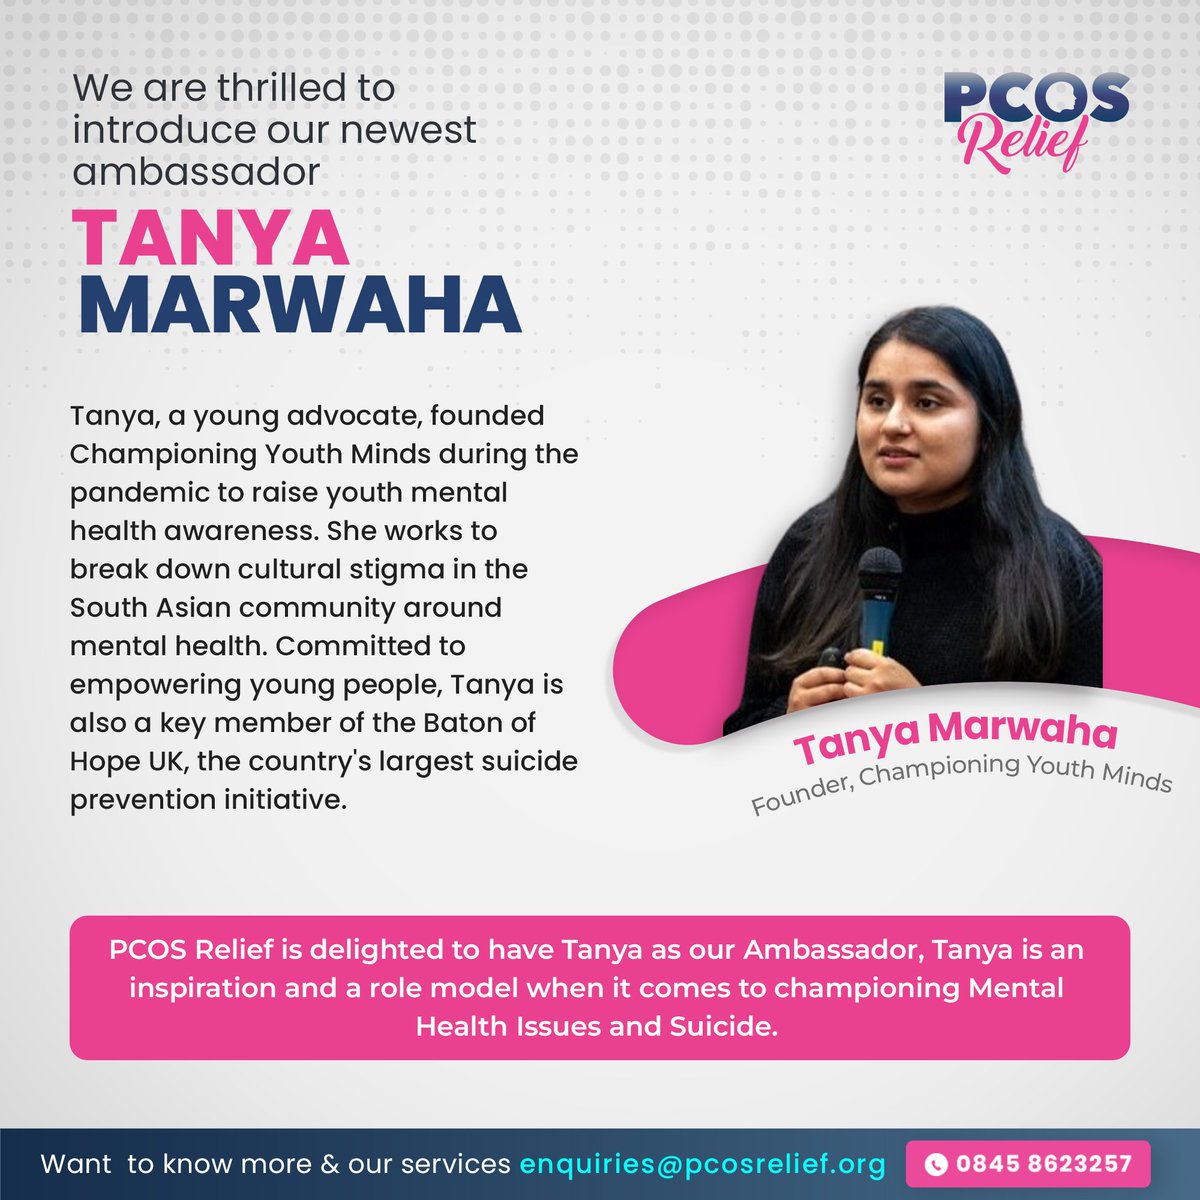 🌟 Exciting Announcement! 🌟

We are thrilled to introduce our newest ambassador, @tanyamarwaha_✨

PCOS Relief is delighted to have Tanya as our Ambassador, Tanya is an inspiration and a role model when it comes to championing Mental Health Issues and Suicide.
#pcos #pcosdiet